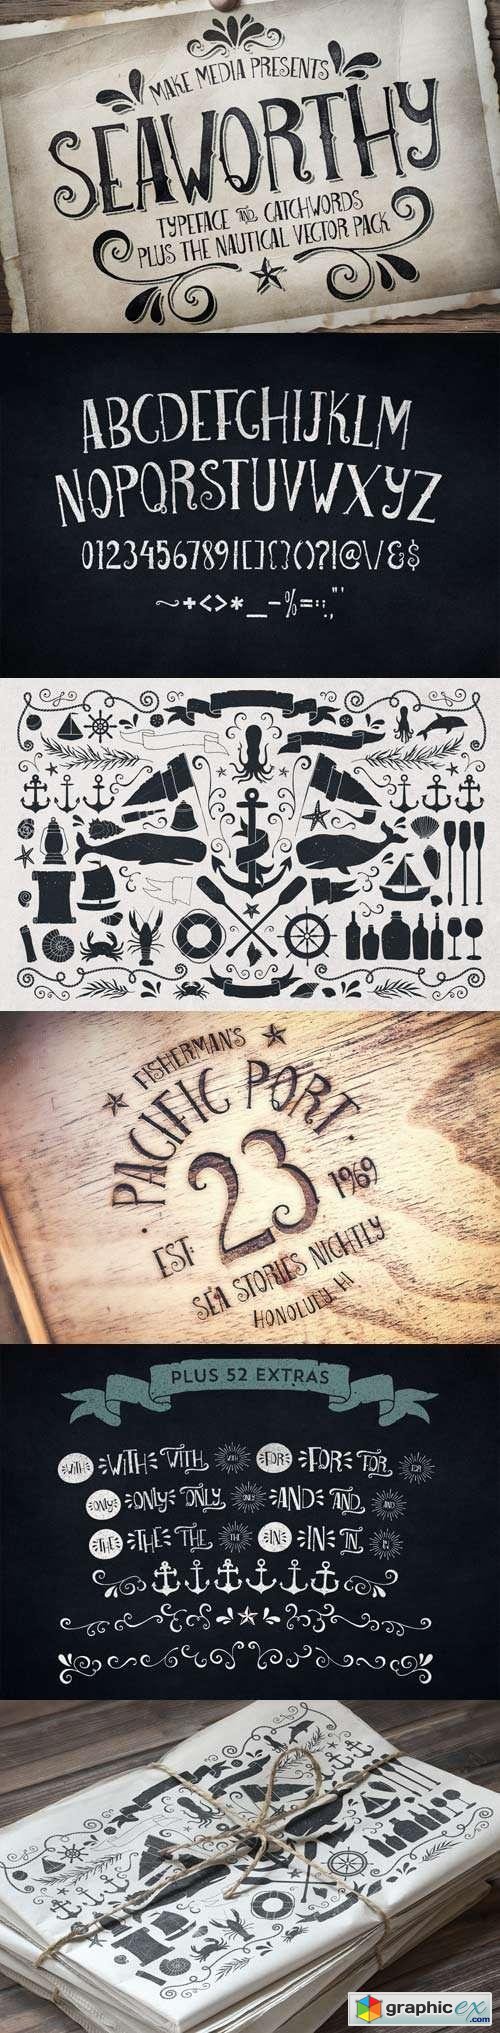 Seaworthy Font Family - 2 Fonts for $25